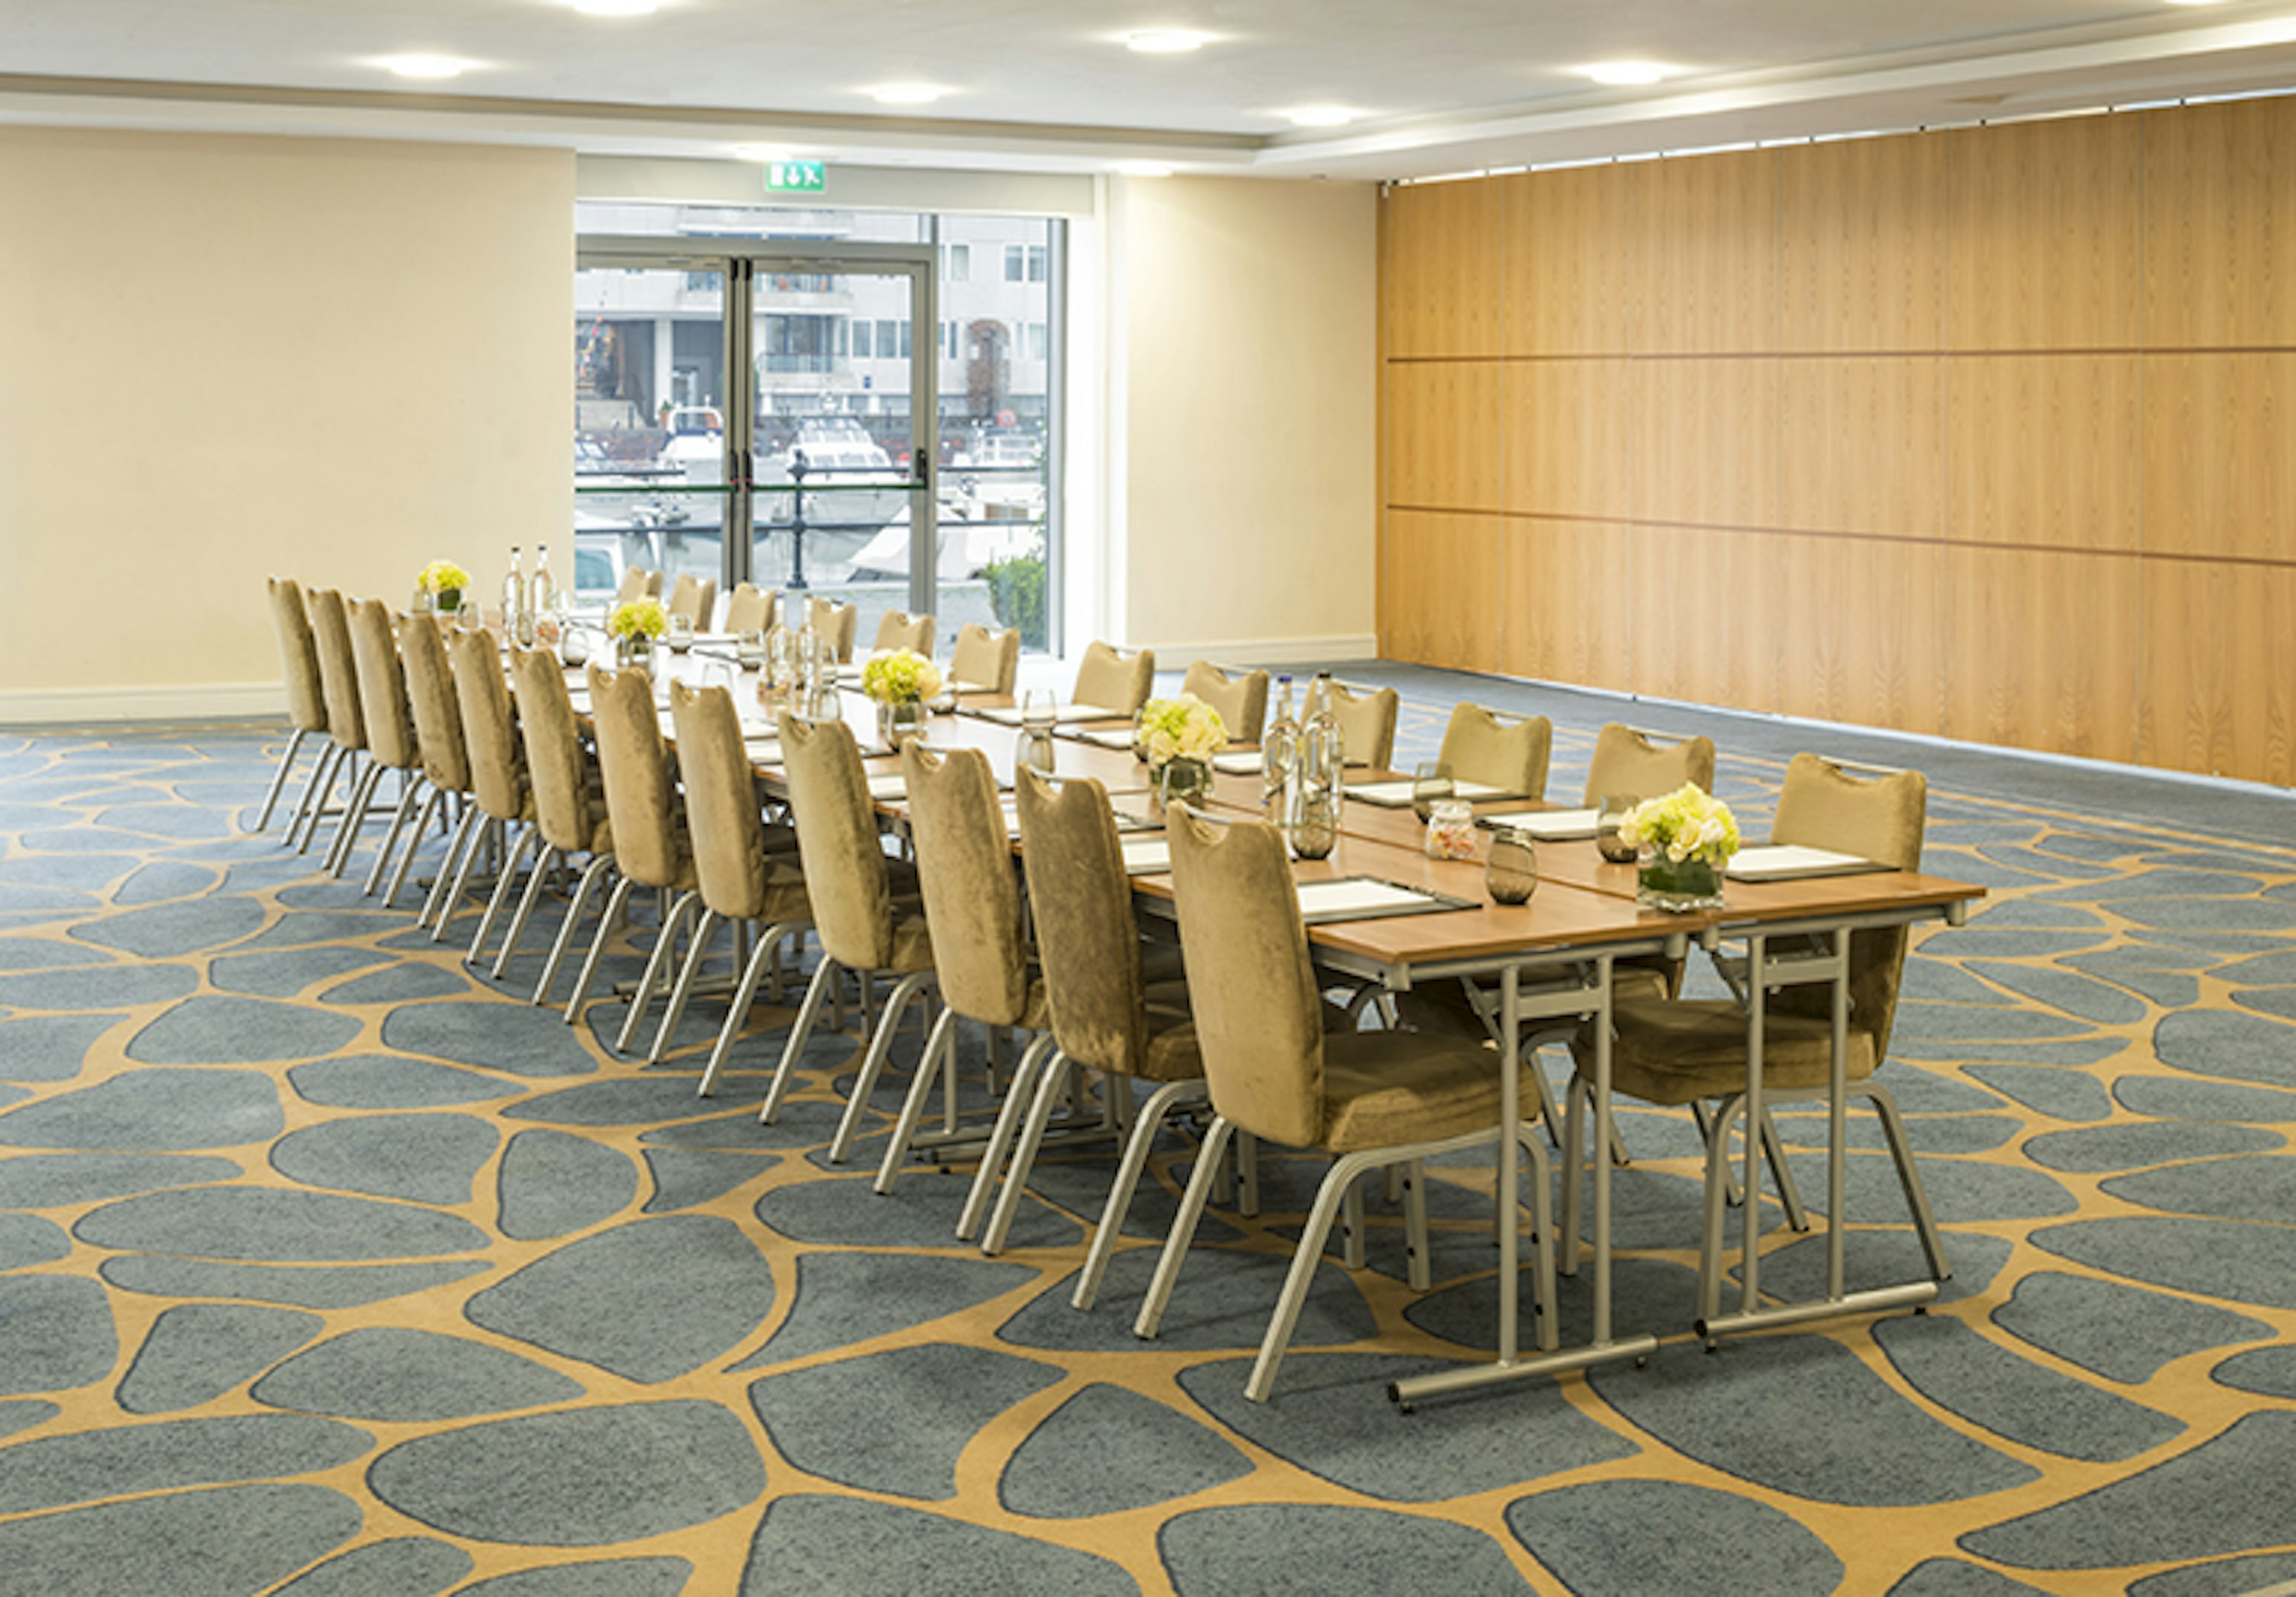 Business - The Chelsea Harbour Hotel